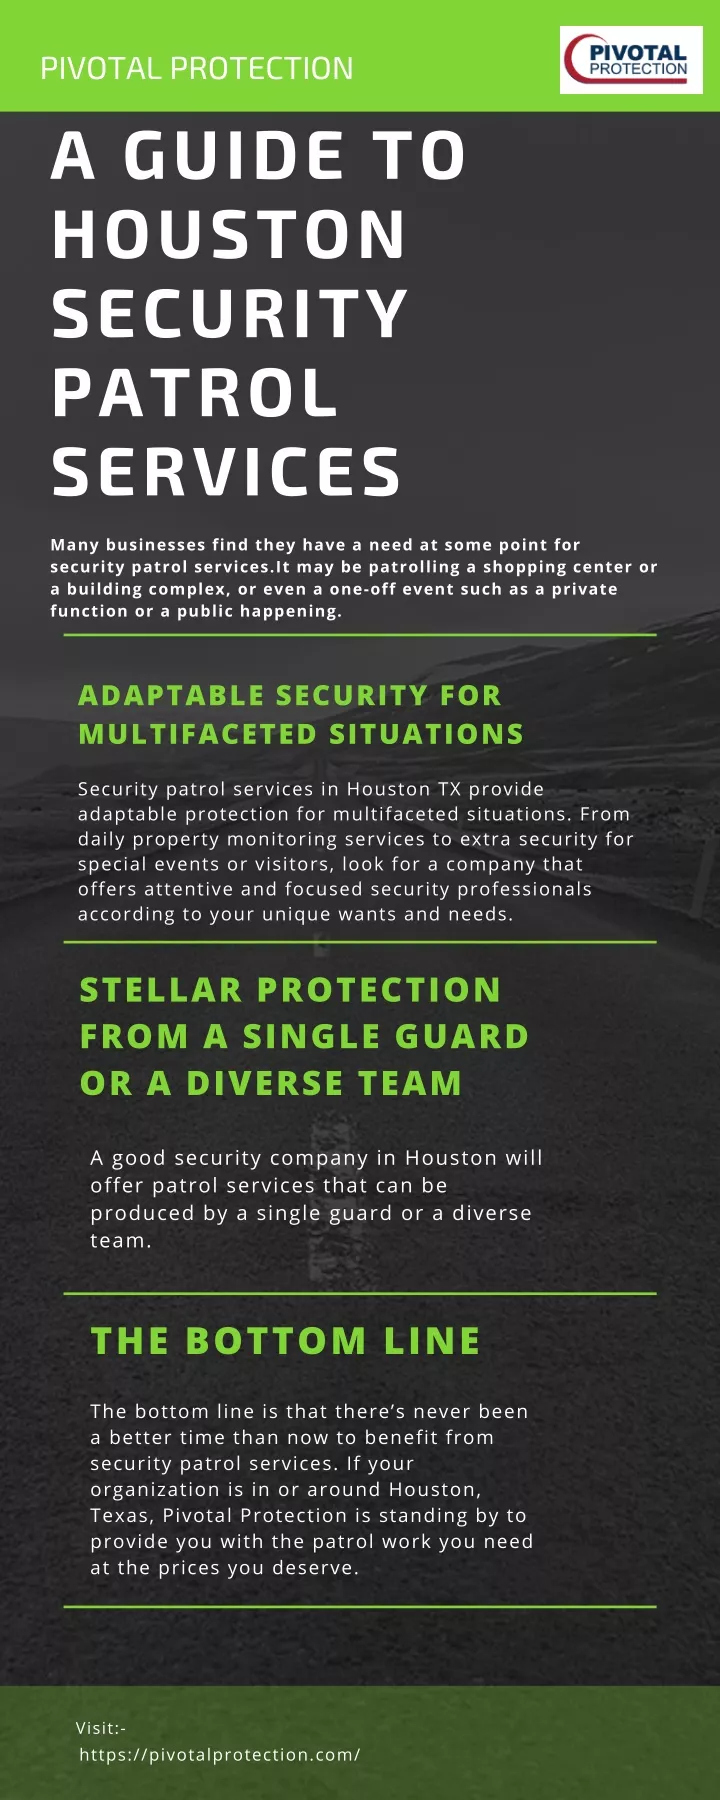 pivotal protection a guide to houston security